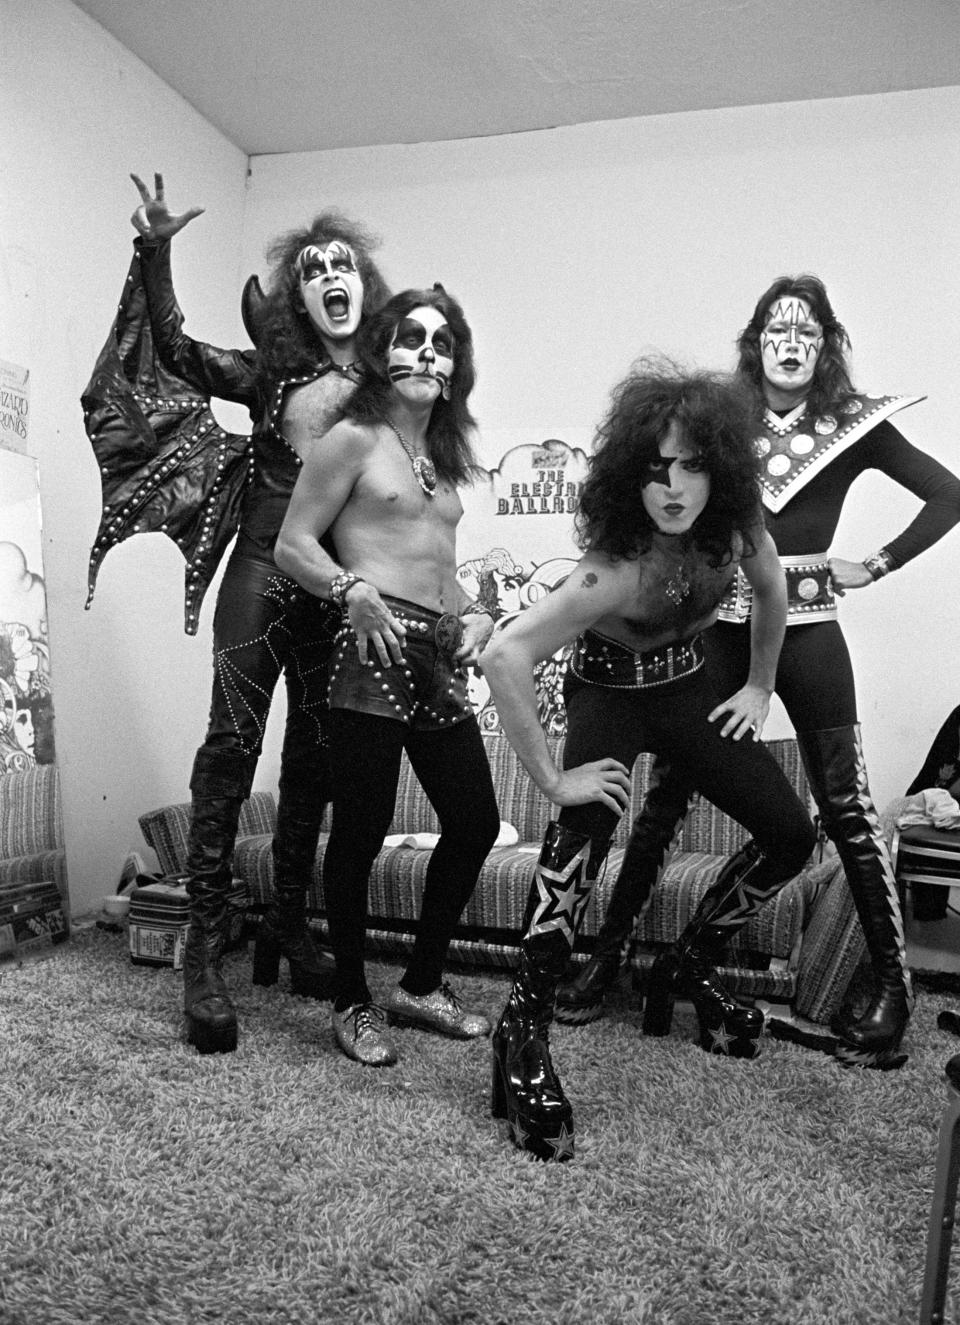 Gene Simmons, Peter Criss, Paul Stanley and Ace Frehley. (Photo by Tom Hill/WireImage)